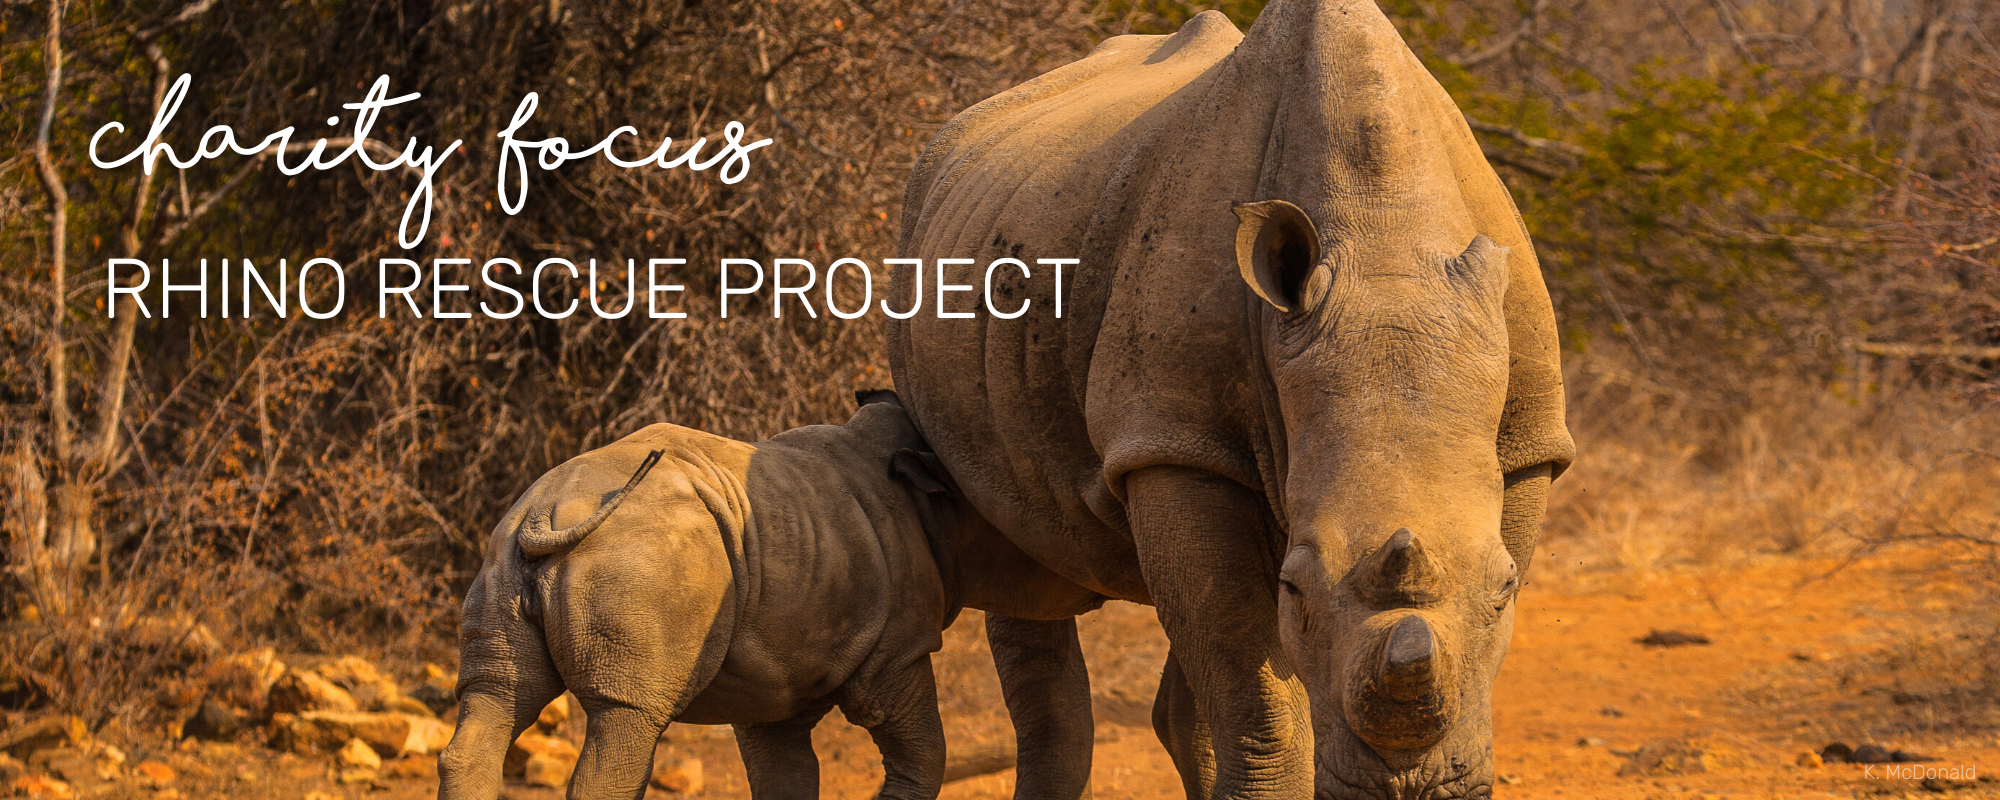 CHARITY FOCUS - RHINO RESCUE PROJECT